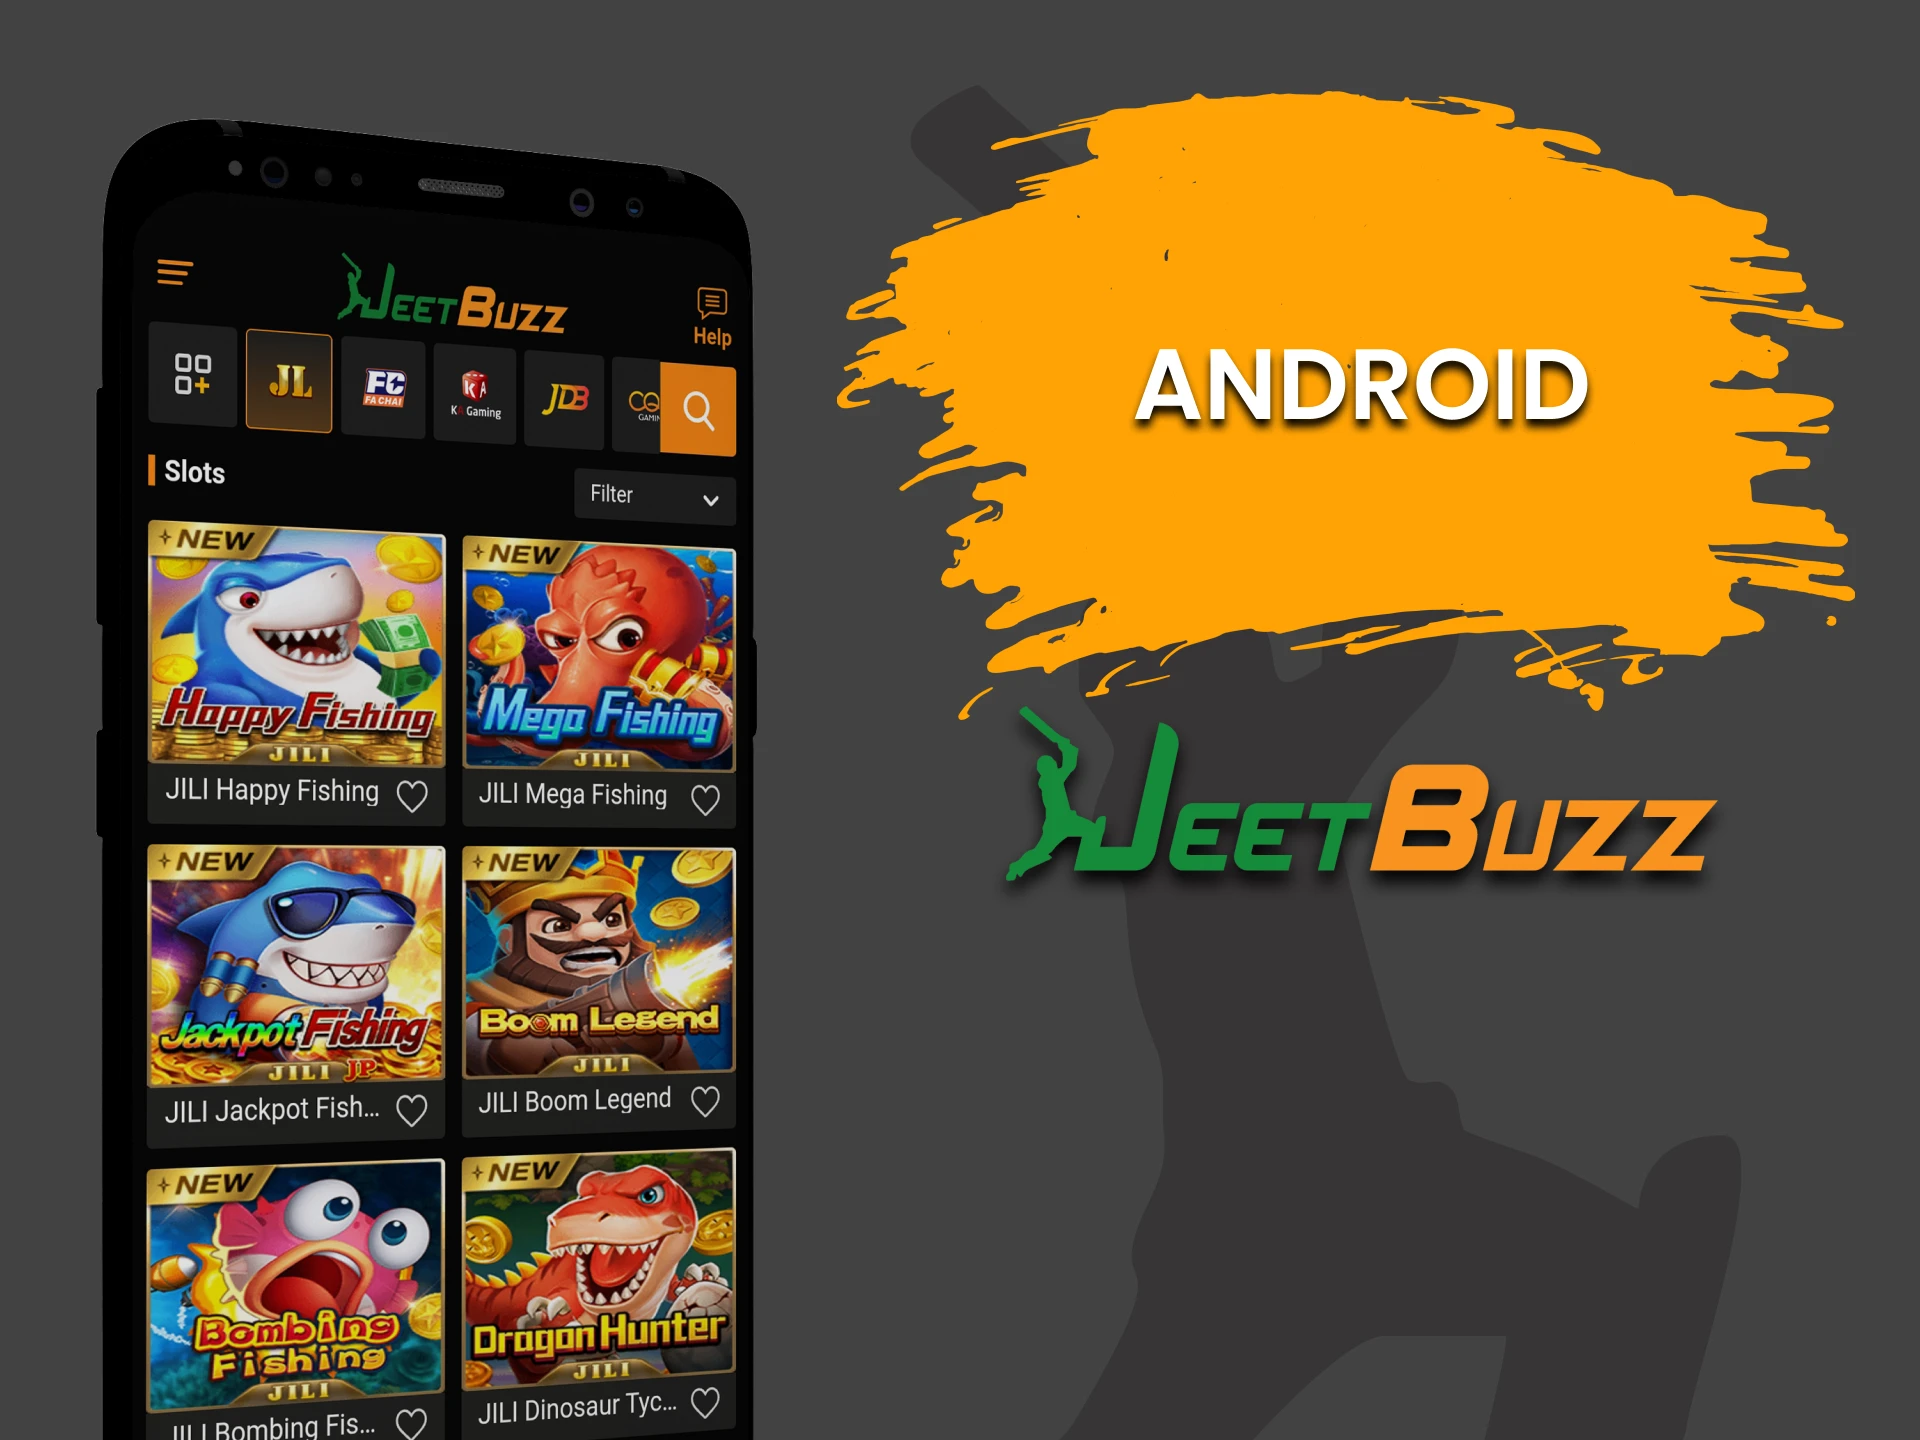 Download the JeetBuzz Android app and visit the Fishing section.